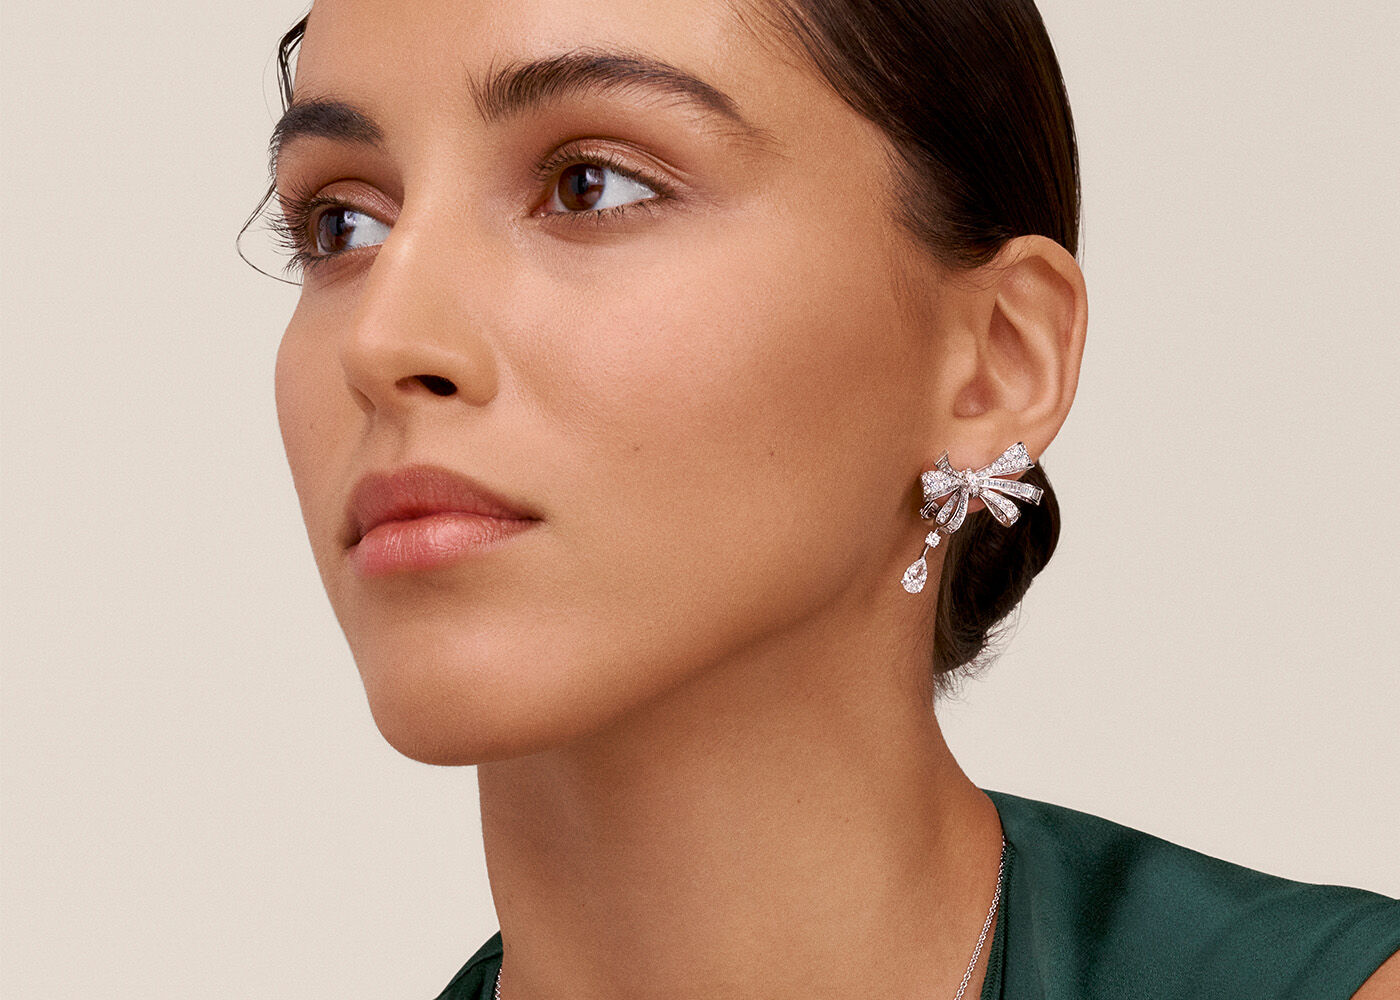 Model wears earrings from the Tilda's Bow collection